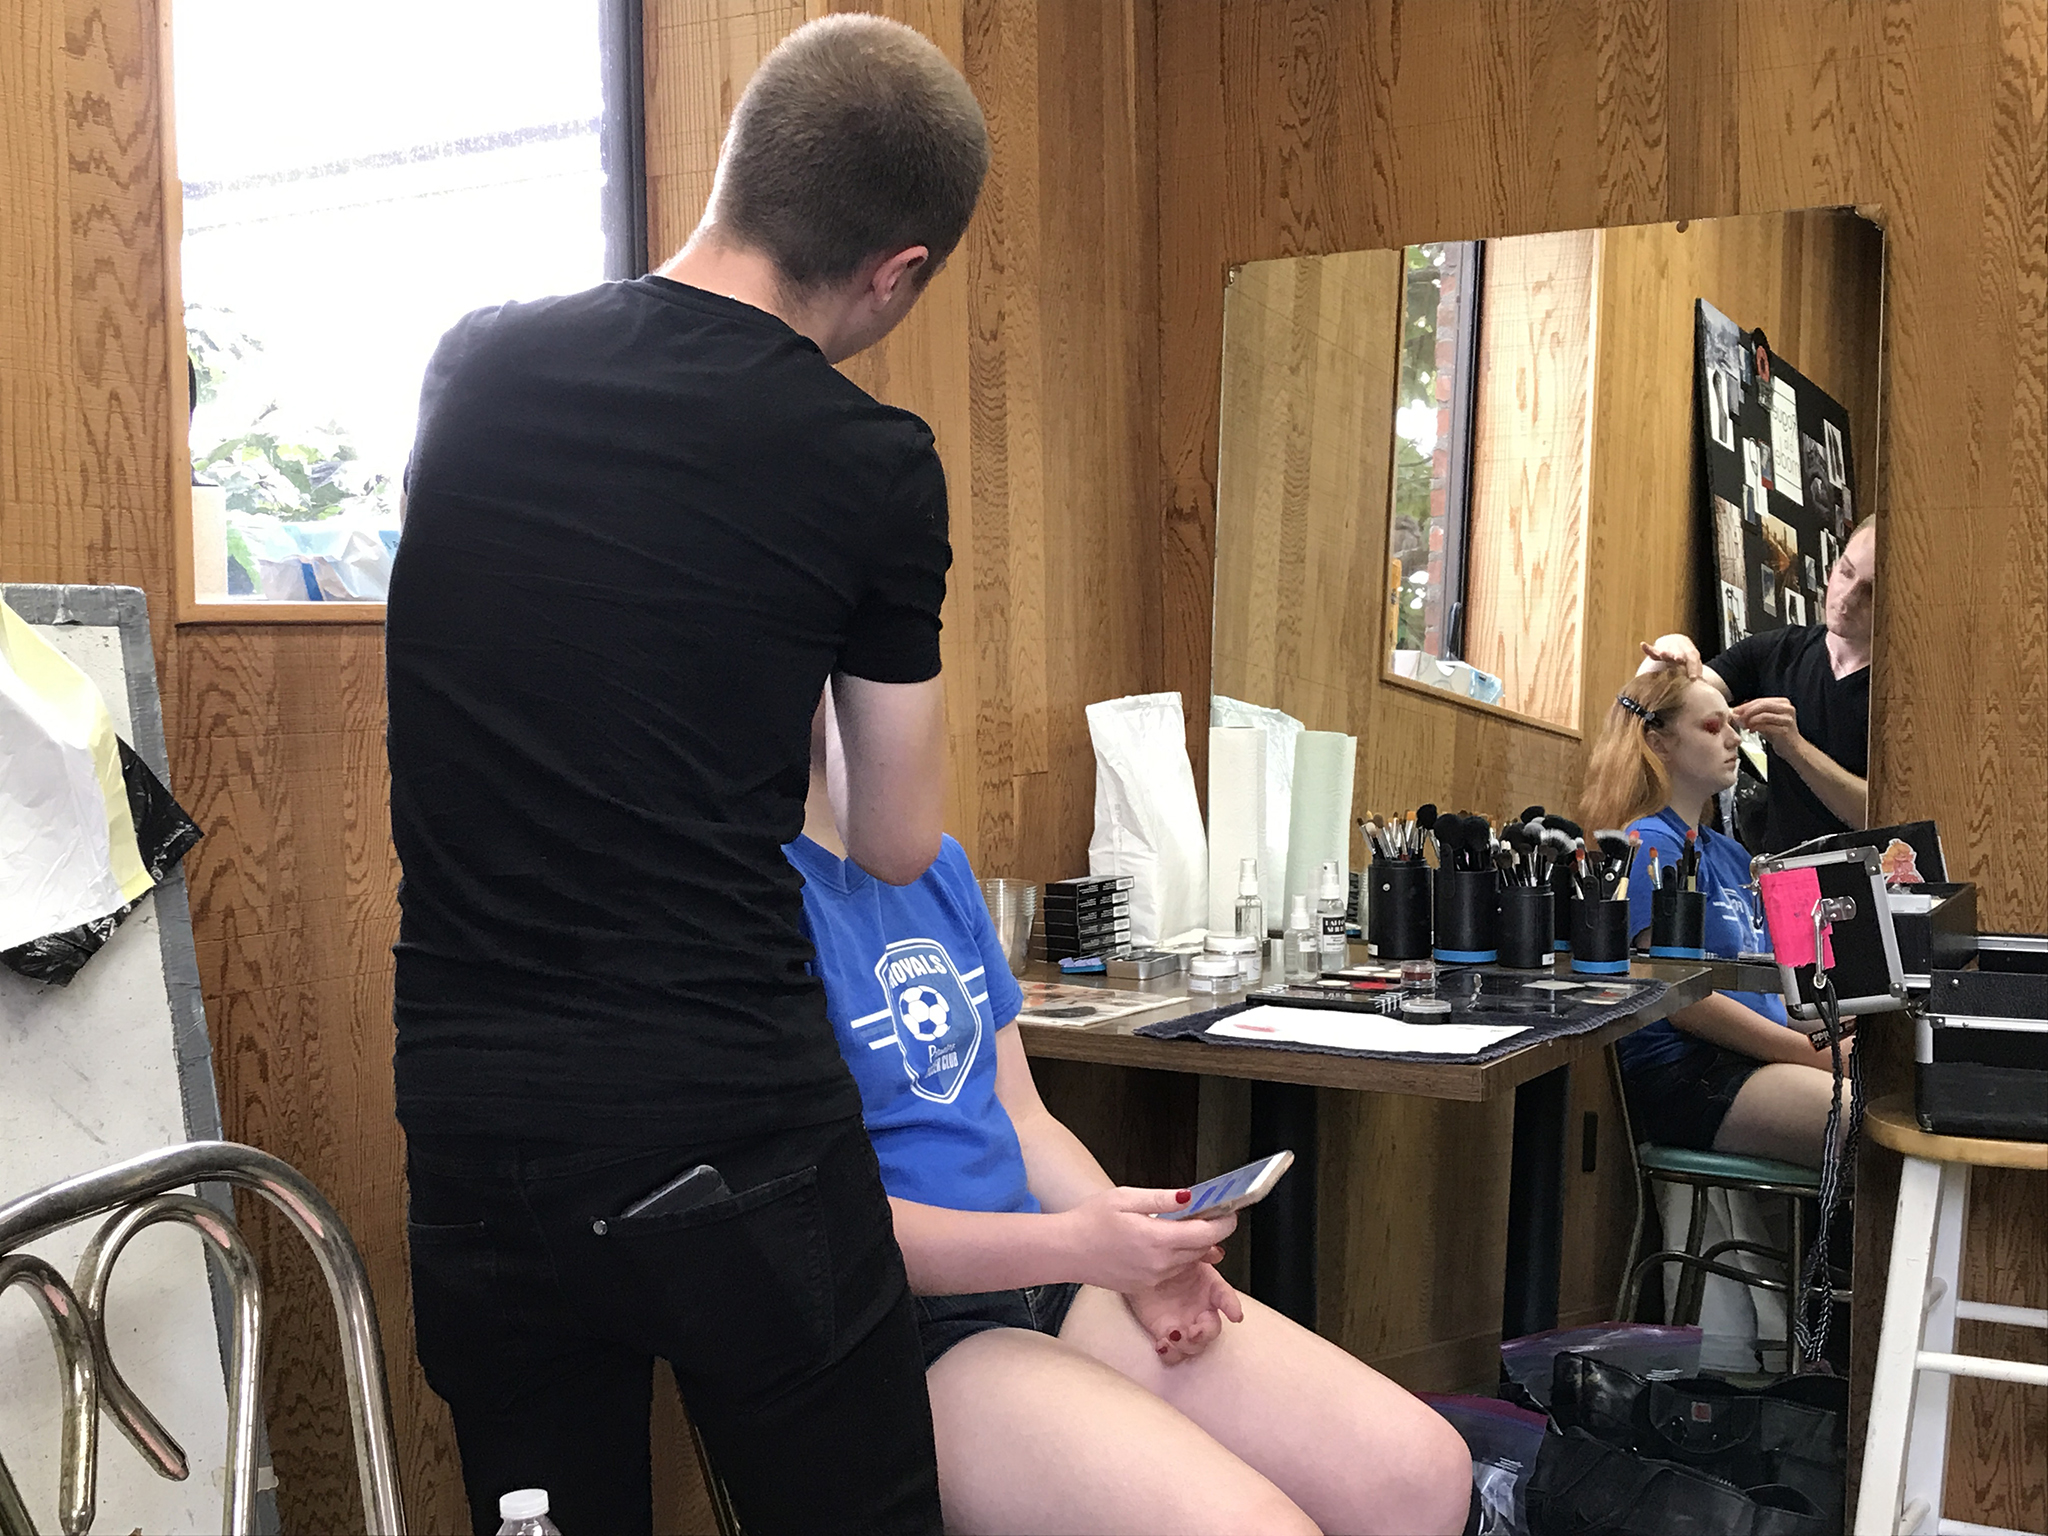 Behind The Scenes: Model in the makeup chair before the show.